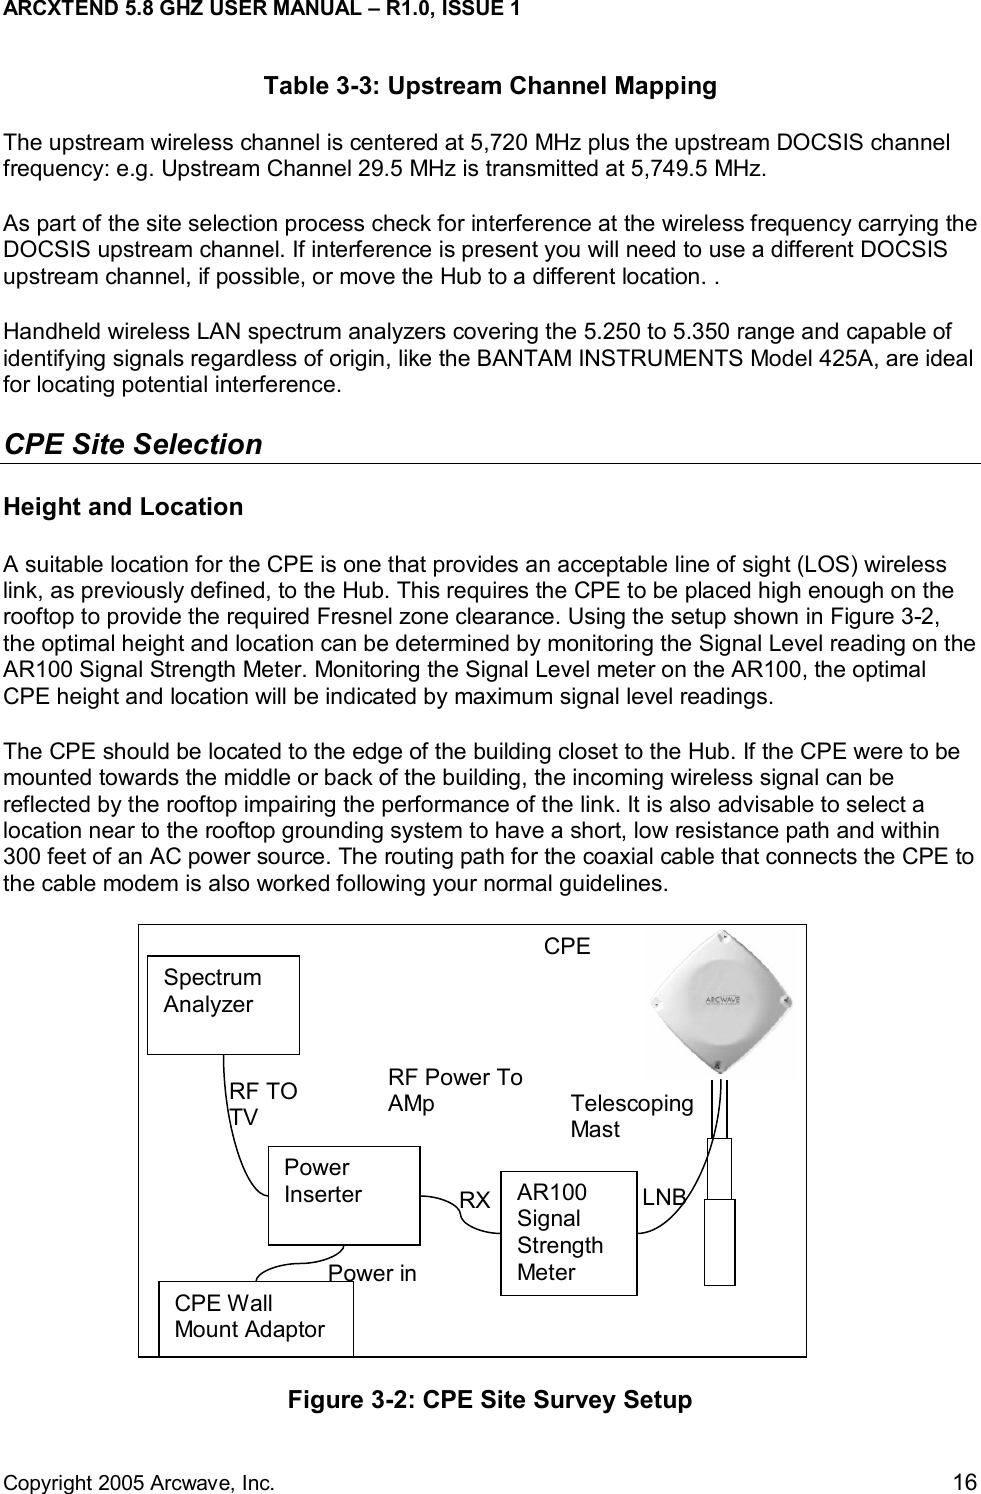 ARCXTEND 5.8 GHZ USER MANUAL – R1.0, ISSUE 1  Copyright 2005 Arcwave, Inc.    16 Table 3-3: Upstream Channel Mapping The upstream wireless channel is centered at 5,720 MHz plus the upstream DOCSIS channel frequency: e.g. Upstream Channel 29.5 MHz is transmitted at 5,749.5 MHz.   As part of the site selection process check for interference at the wireless frequency carrying the DOCSIS upstream channel. If interference is present you will need to use a different DOCSIS upstream channel, if possible, or move the Hub to a different location. .  Handheld wireless LAN spectrum analyzers covering the 5.250 to 5.350 range and capable of identifying signals regardless of origin, like the BANTAM INSTRUMENTS Model 425A, are ideal for locating potential interference.  CPE Site Selection  Height and Location A suitable location for the CPE is one that provides an acceptable line of sight (LOS) wireless link, as previously defined, to the Hub. This requires the CPE to be placed high enough on the rooftop to provide the required Fresnel zone clearance. Using the setup shown in Figure 3-2, the optimal height and location can be determined by monitoring the Signal Level reading on the AR100 Signal Strength Meter. Monitoring the Signal Level meter on the AR100, the optimal CPE height and location will be indicated by maximum signal level readings.  The CPE should be located to the edge of the building closet to the Hub. If the CPE were to be mounted towards the middle or back of the building, the incoming wireless signal can be reflected by the rooftop impairing the performance of the link. It is also advisable to select a location near to the rooftop grounding system to have a short, low resistance path and within 300 feet of an AC power source. The routing path for the coaxial cable that connects the CPE to the cable modem is also worked following your normal guidelines.   Figure 3-2: CPE Site Survey Setup Telescoping Mast CPE LNBCPE Wall Mount Adaptor AR100 Signal Strength Meter RXPower Inserter Spectrum Analyzer RF Power To AMpRF TO TV Power in 